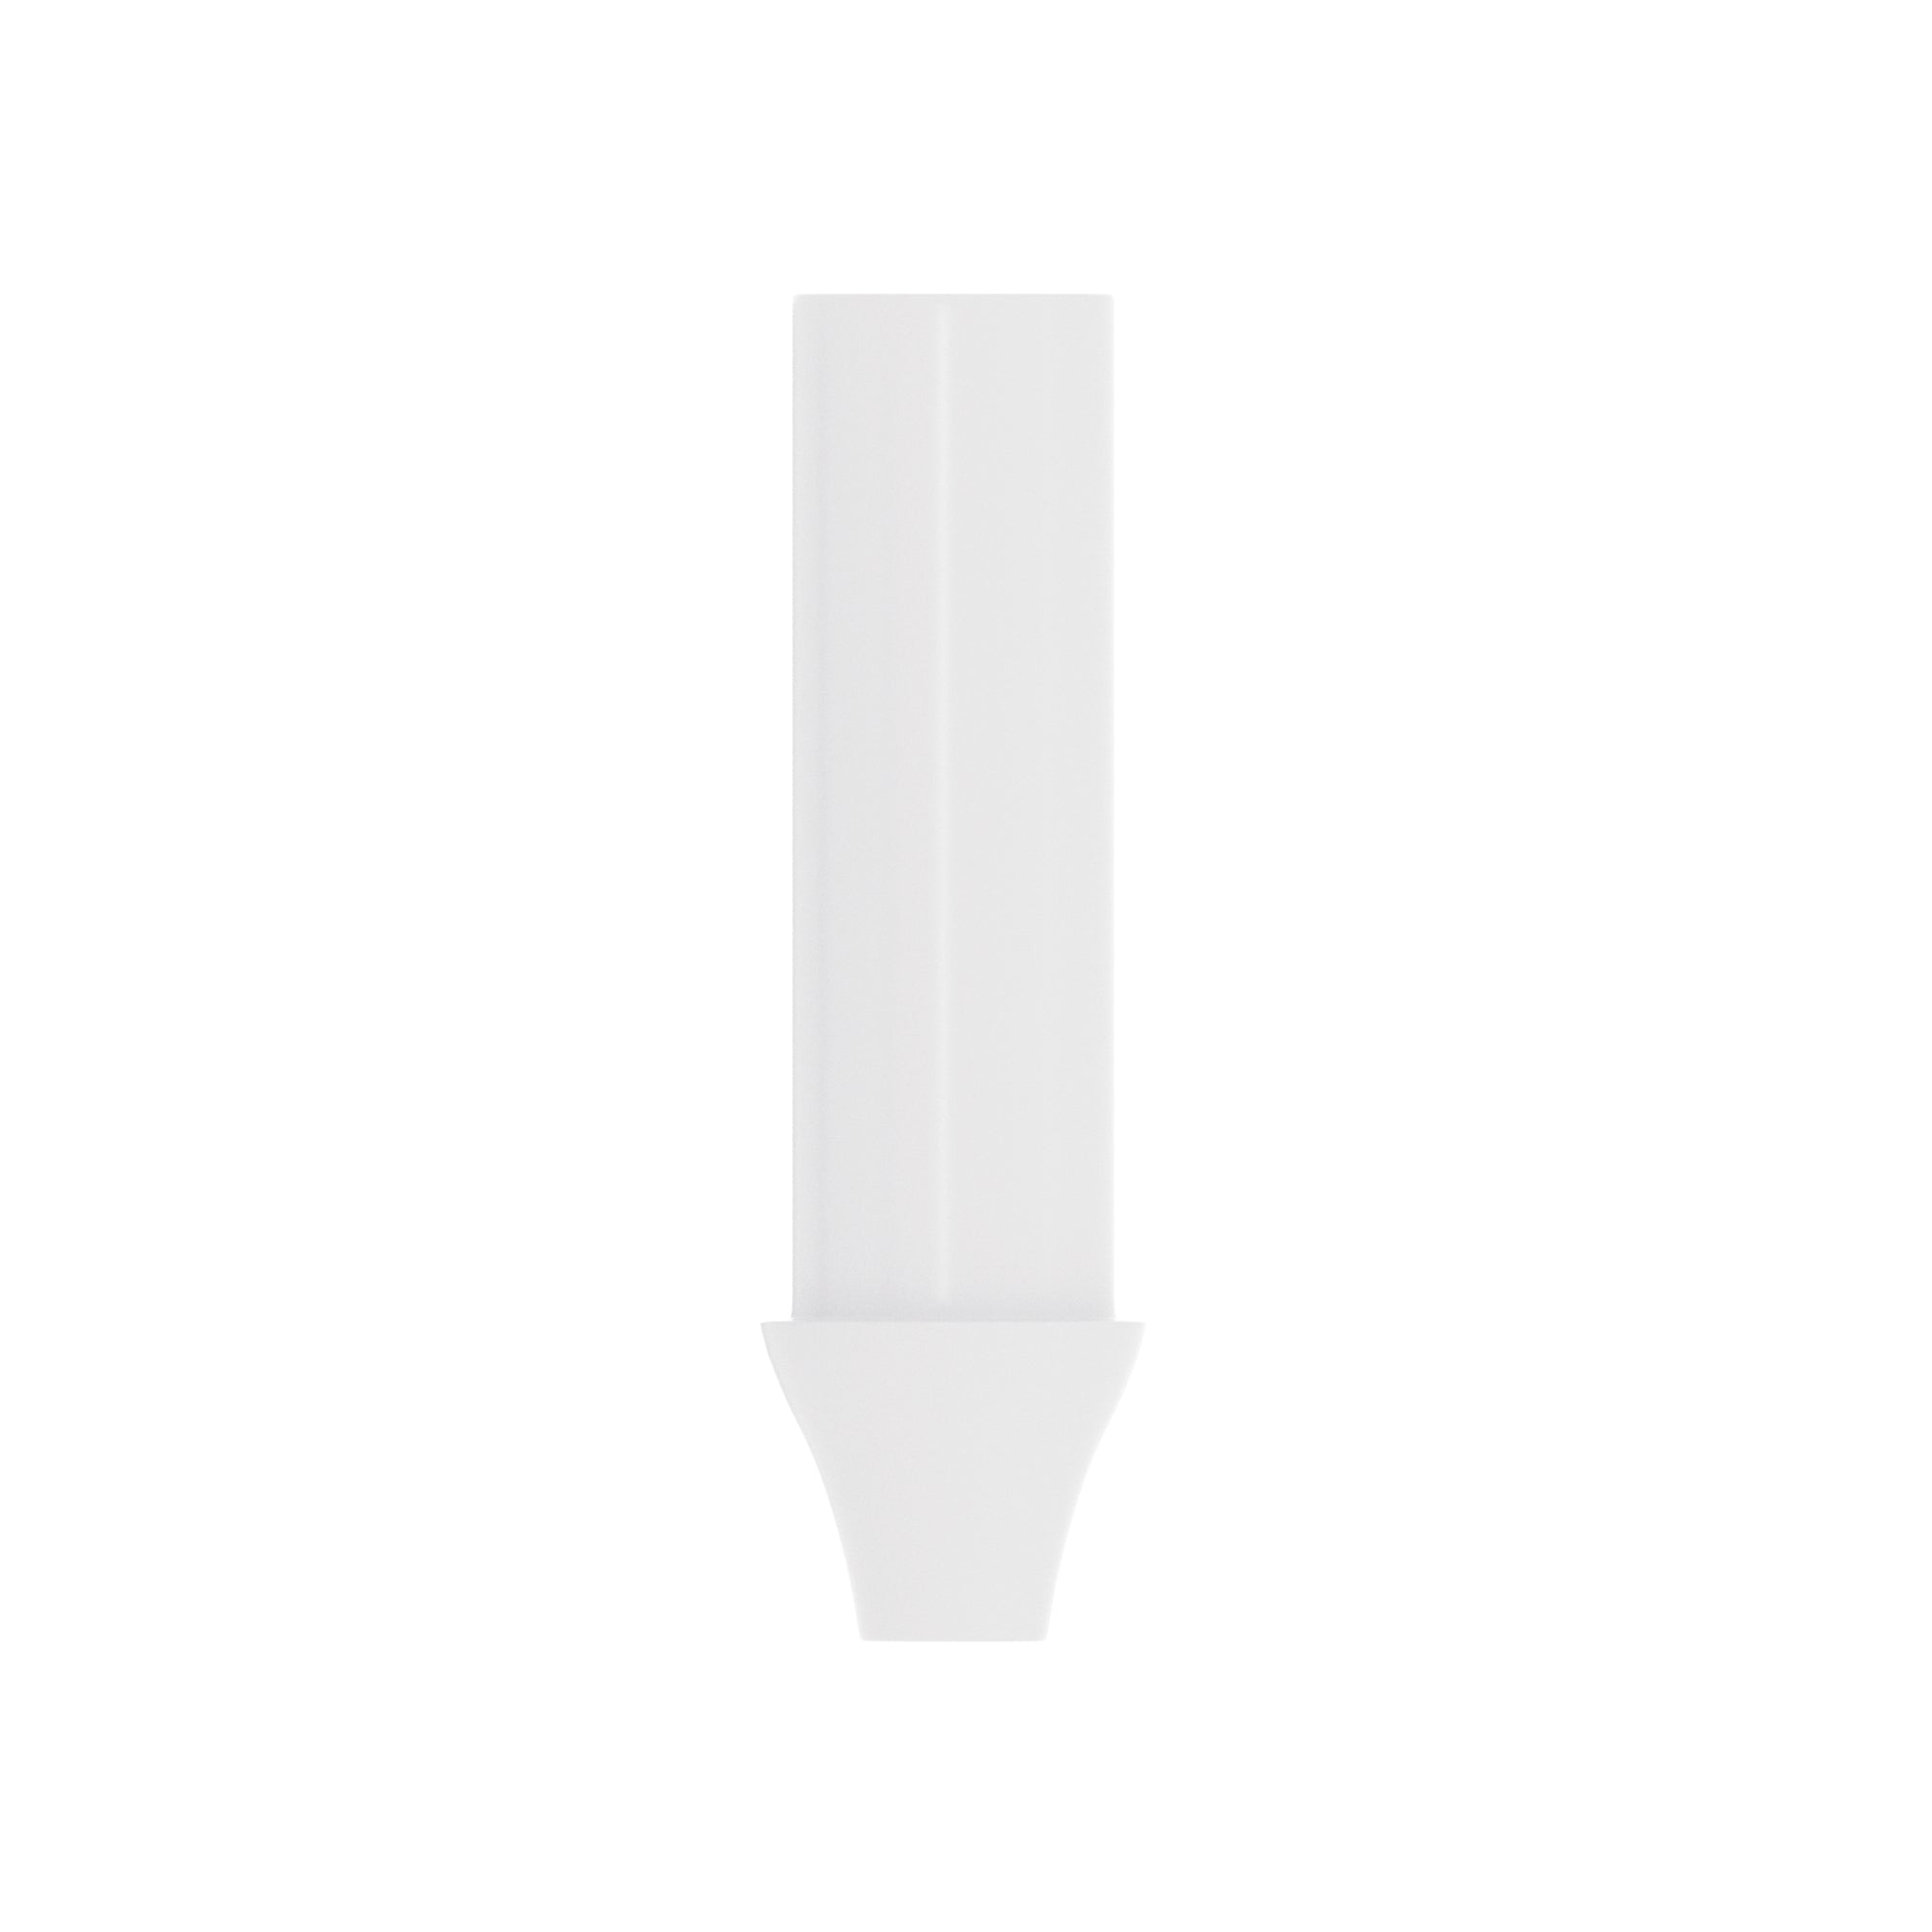 DSI Straight Plastic Castable Abutment Rotational  4.5mm -Conical Connection NP Ø3.5mm